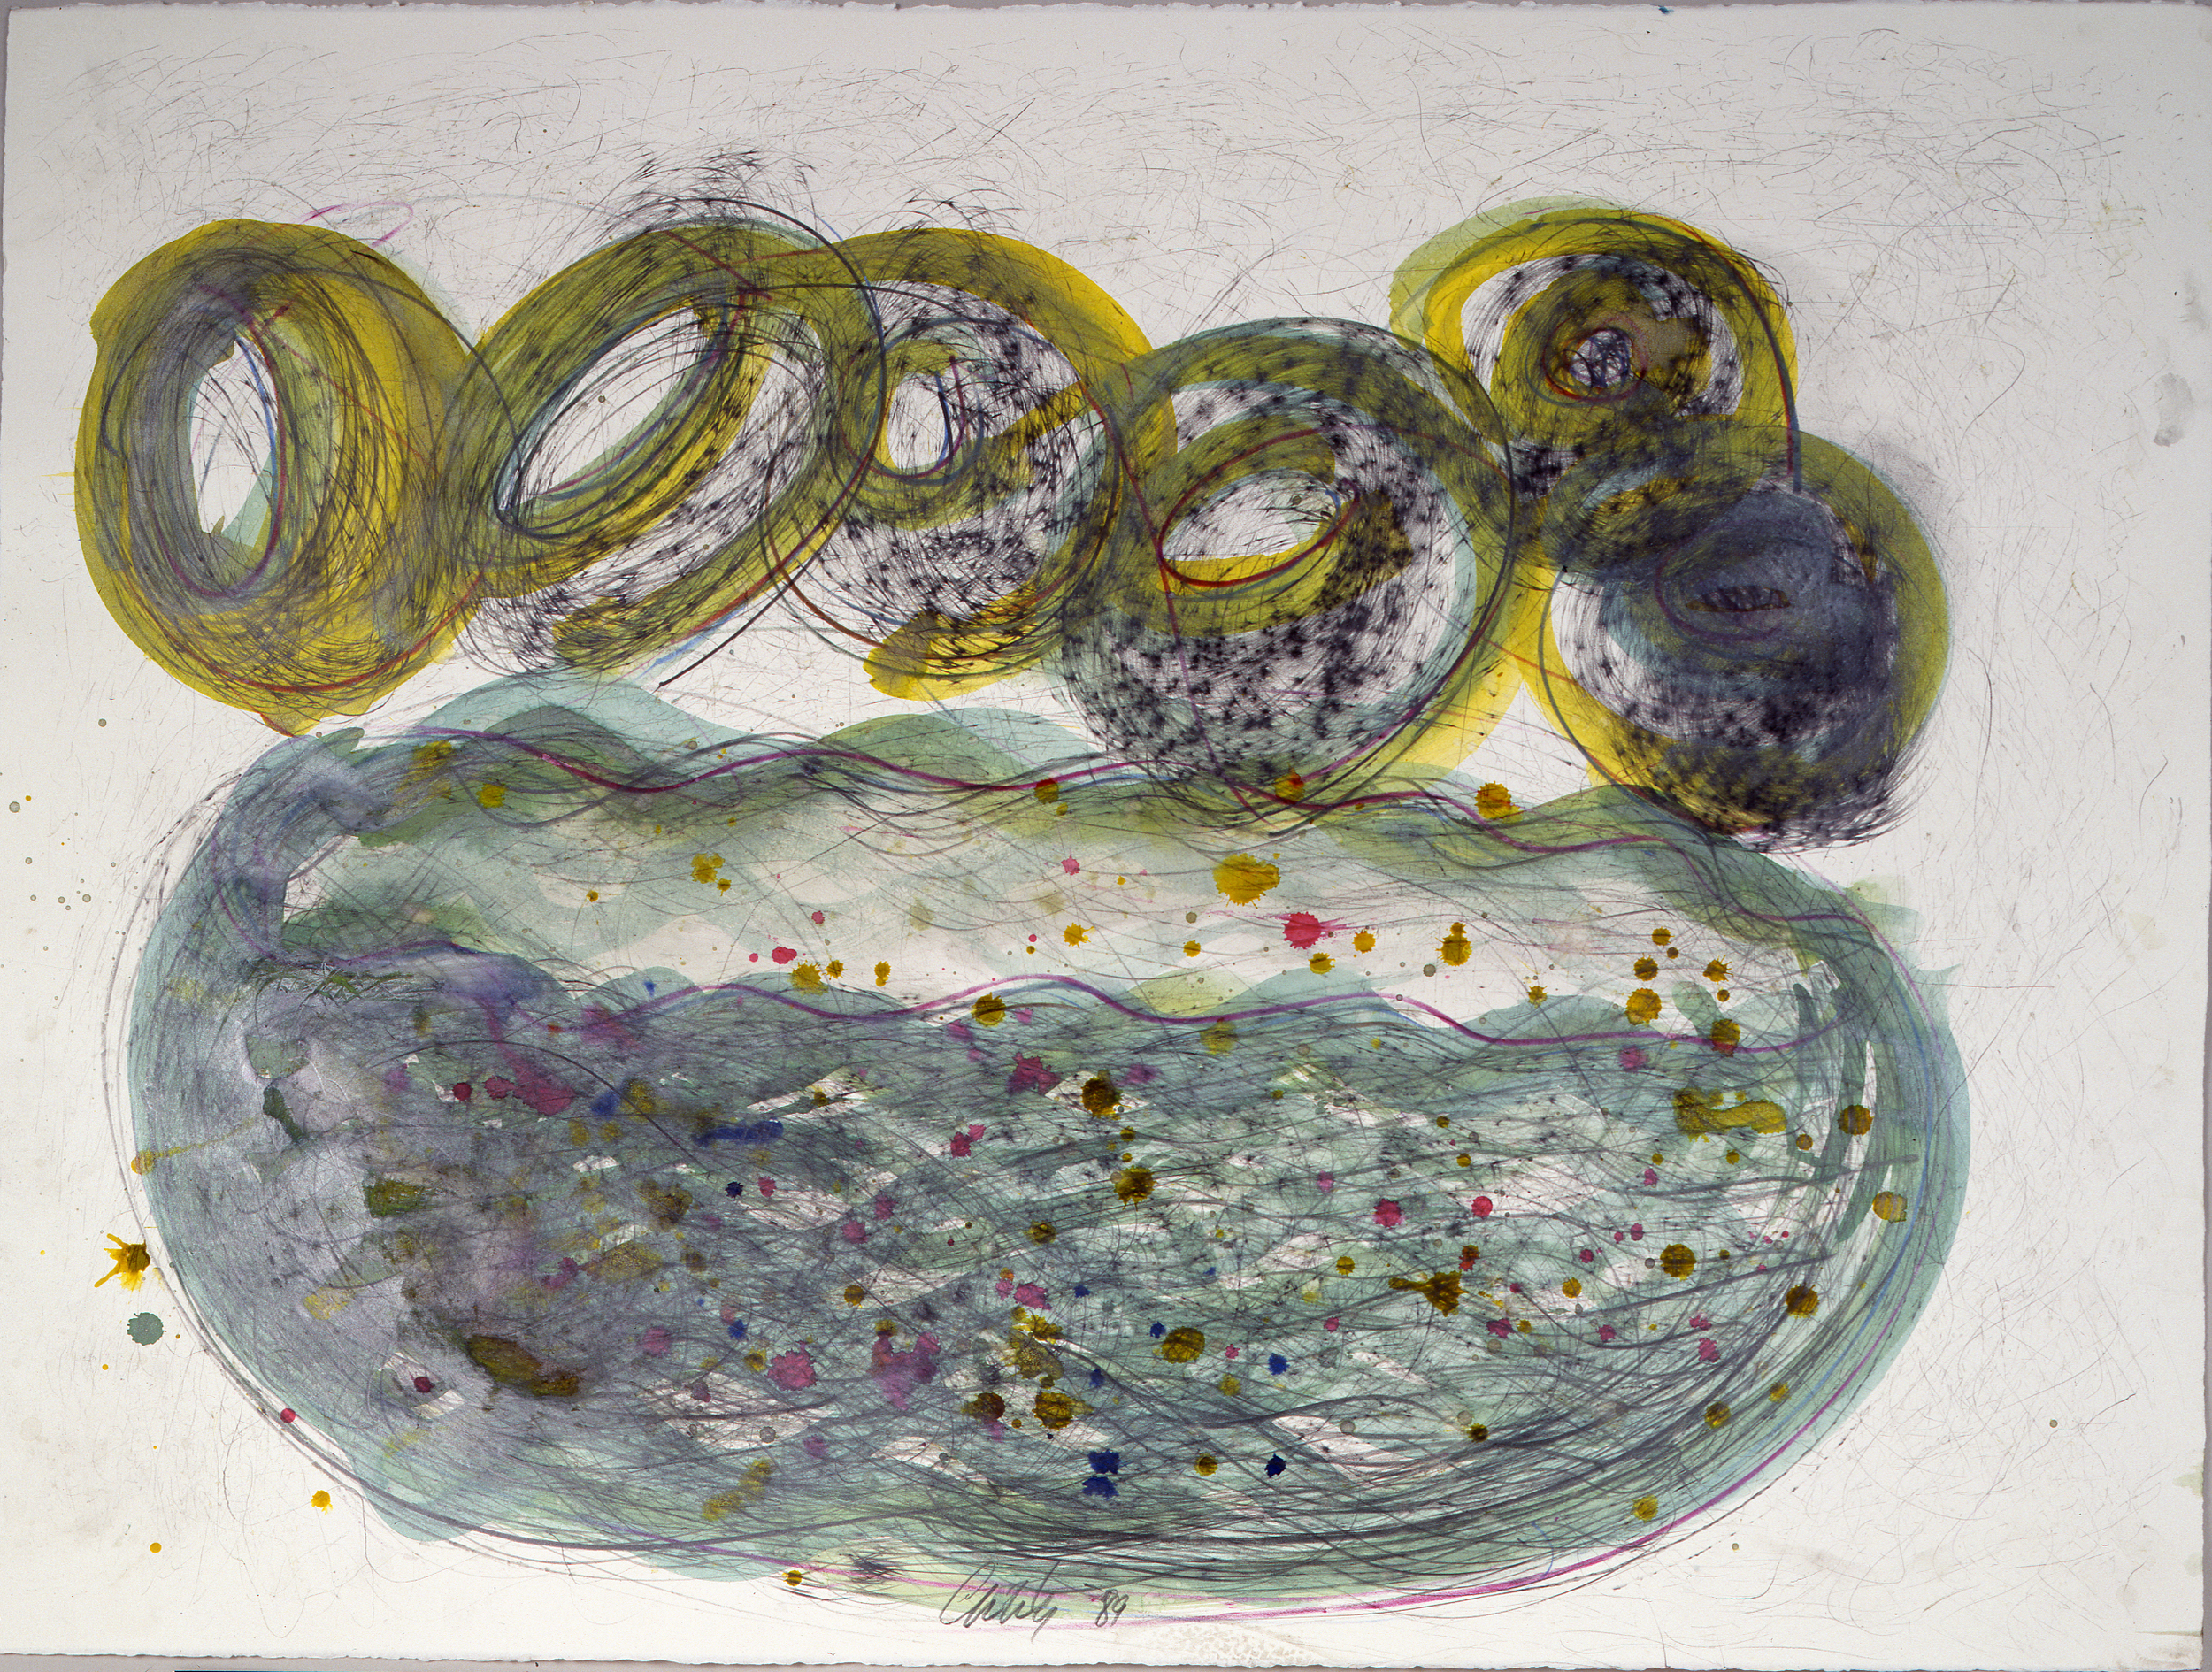  Dale Chihuly,&nbsp; Niijima Drawing #54,&nbsp; (1989, mixed media&nbsp;on paper, 22 x 30 inches), DC.374 